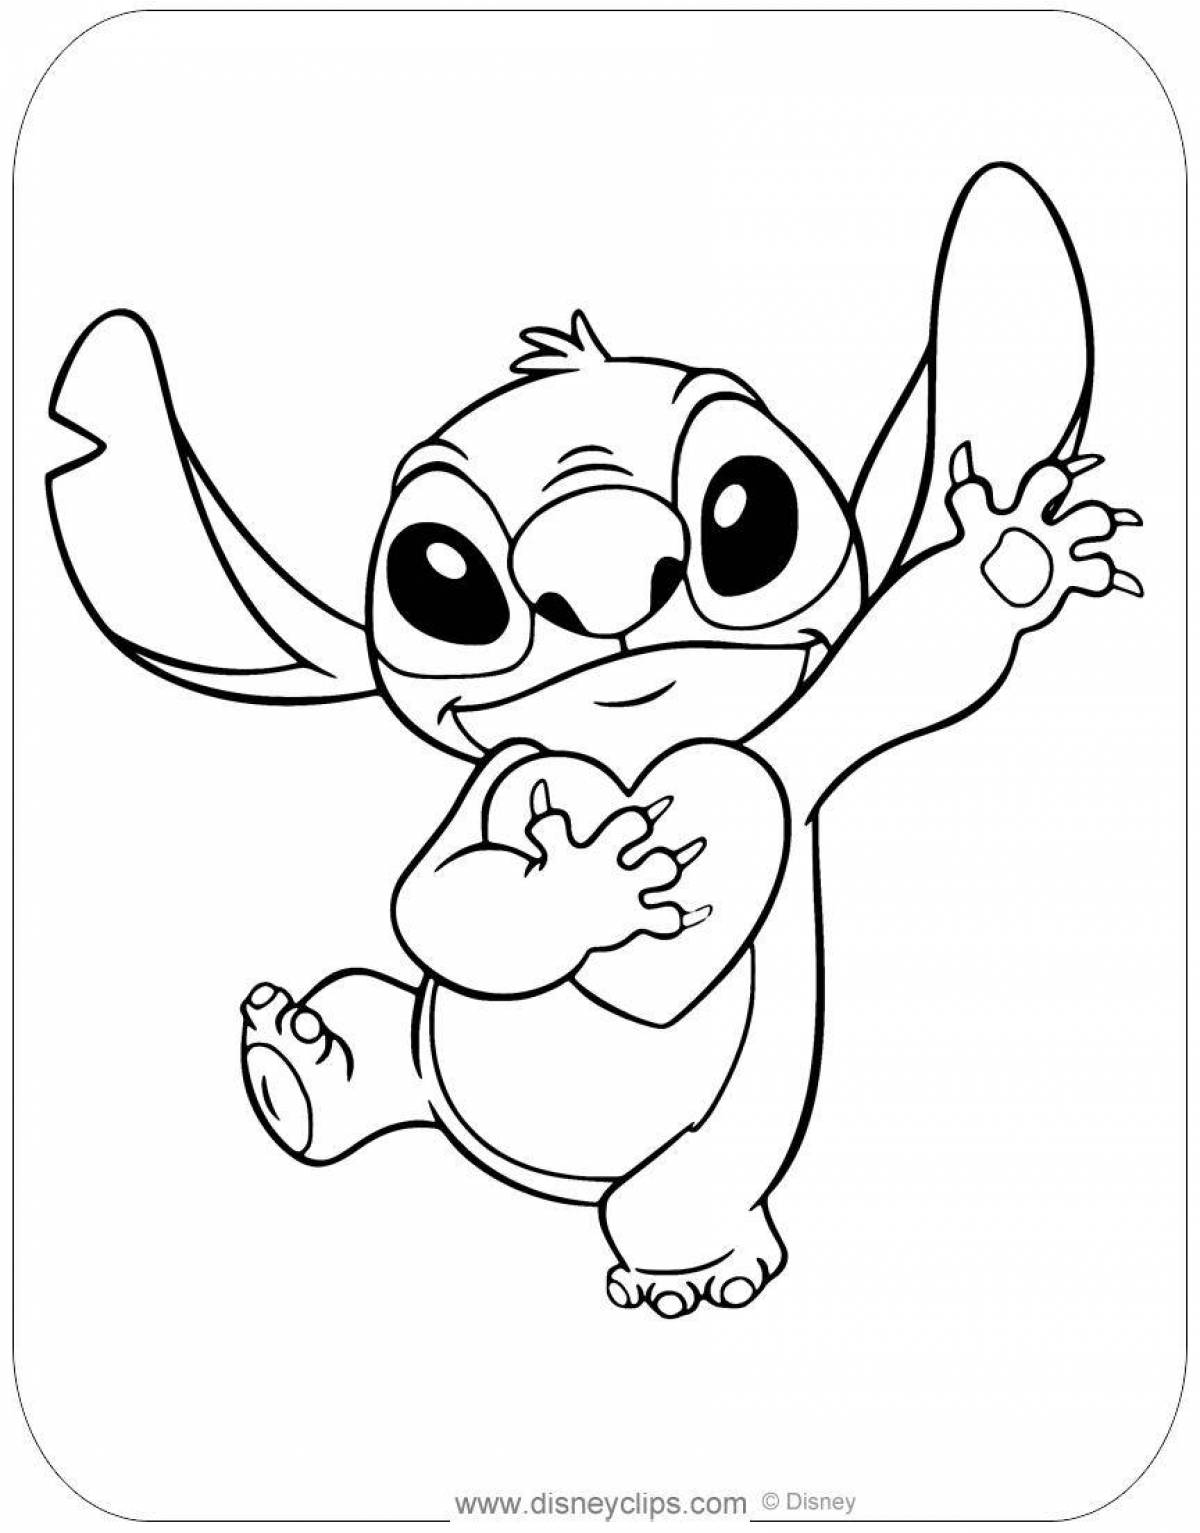 Blessed stitch and angel coloring page